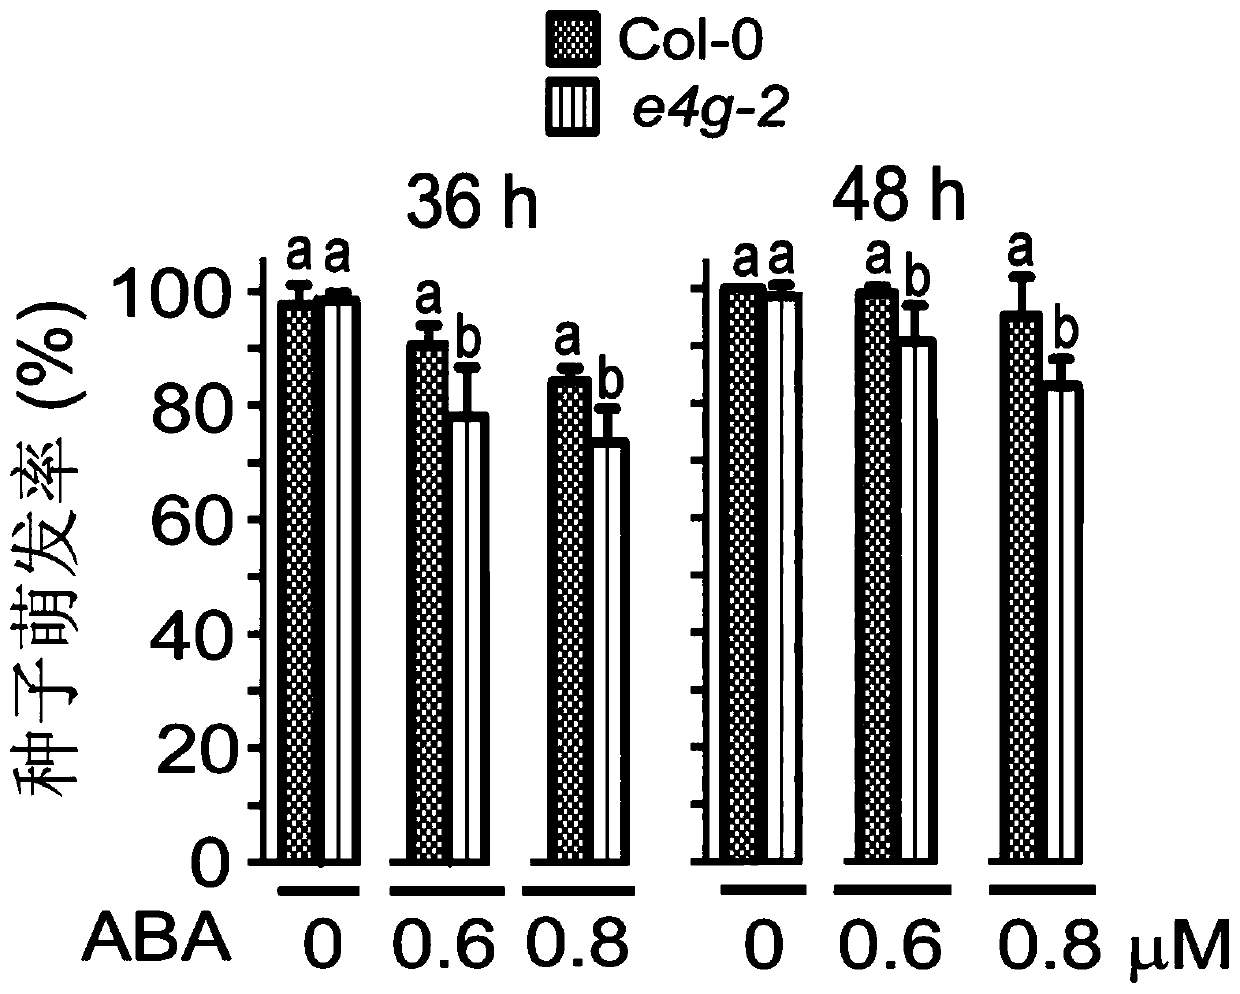 Application of eif4g protein in regulation of plant tolerance to ABA